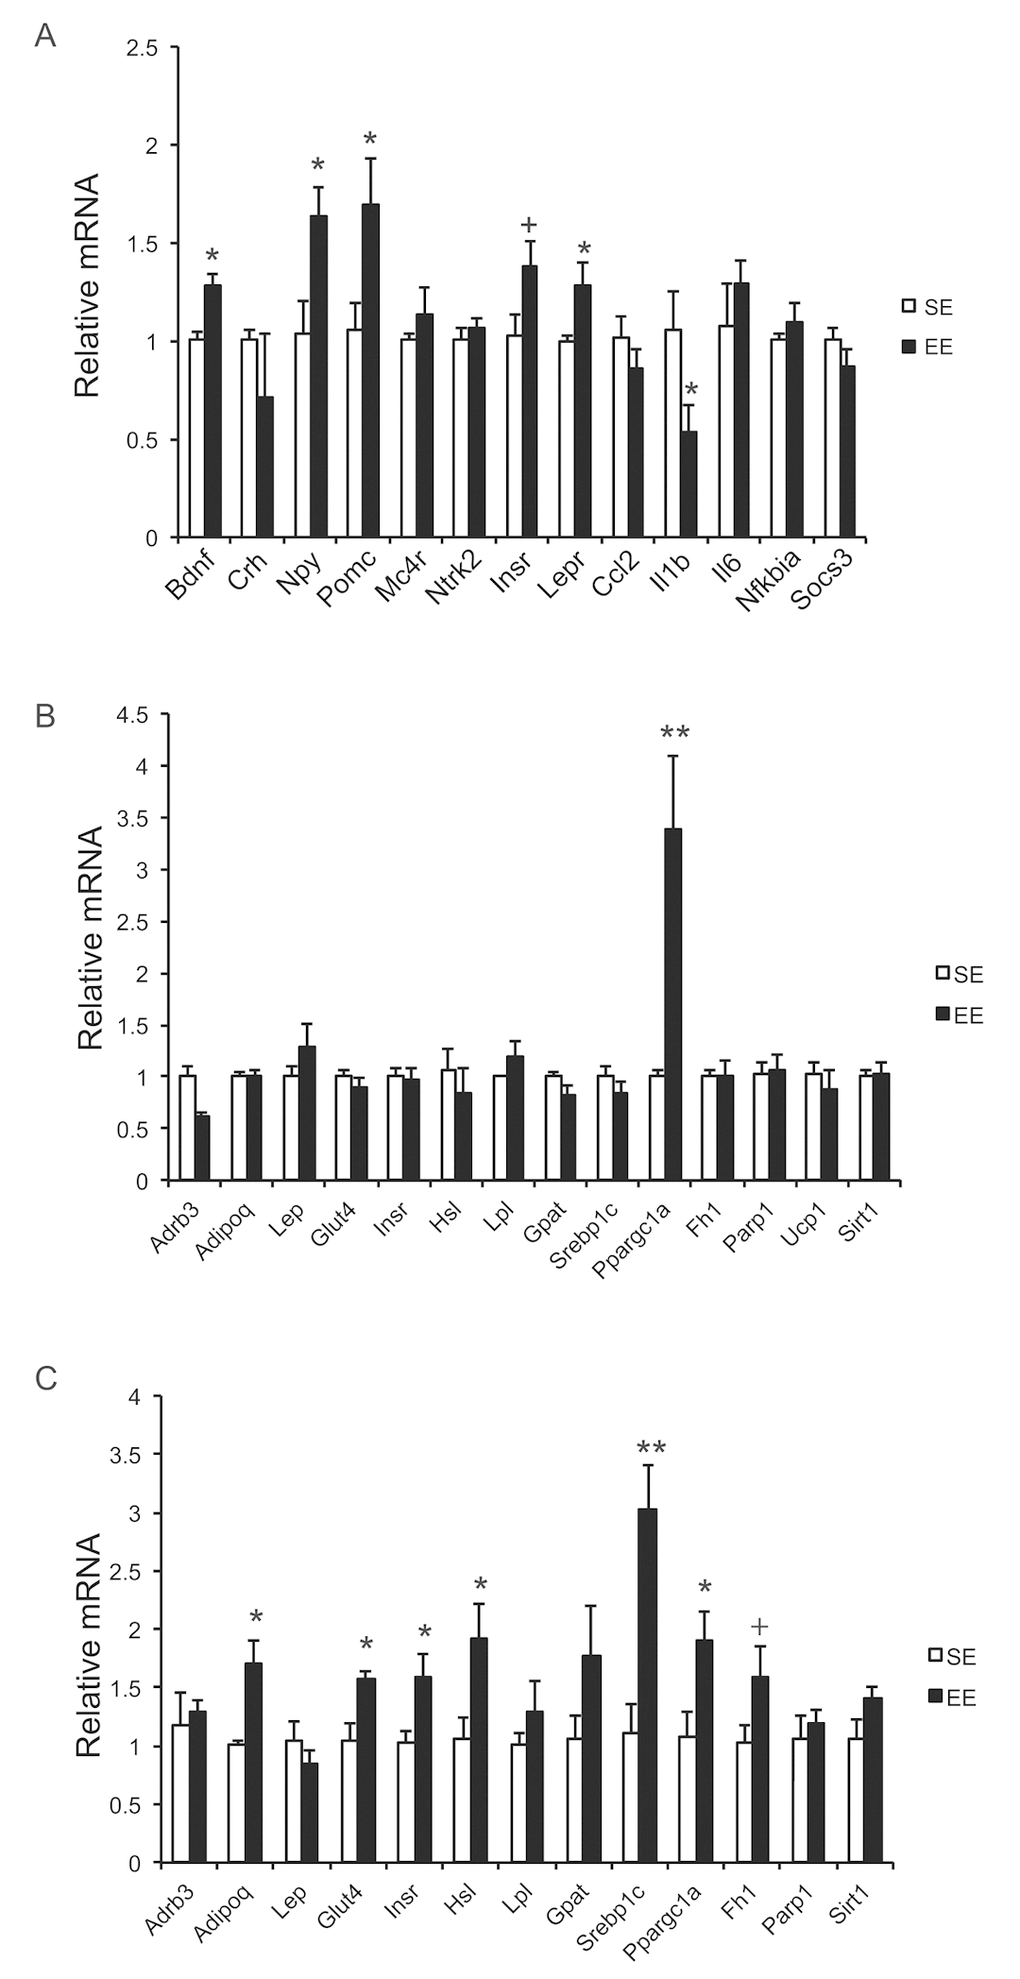 Gene expression profiles after short-term EE in 10-month old mice. (A) Hypothalamus. (B) BAT. (C) rWAT. n=5 per group. * PPP=0.06. Values are means ± SEM.